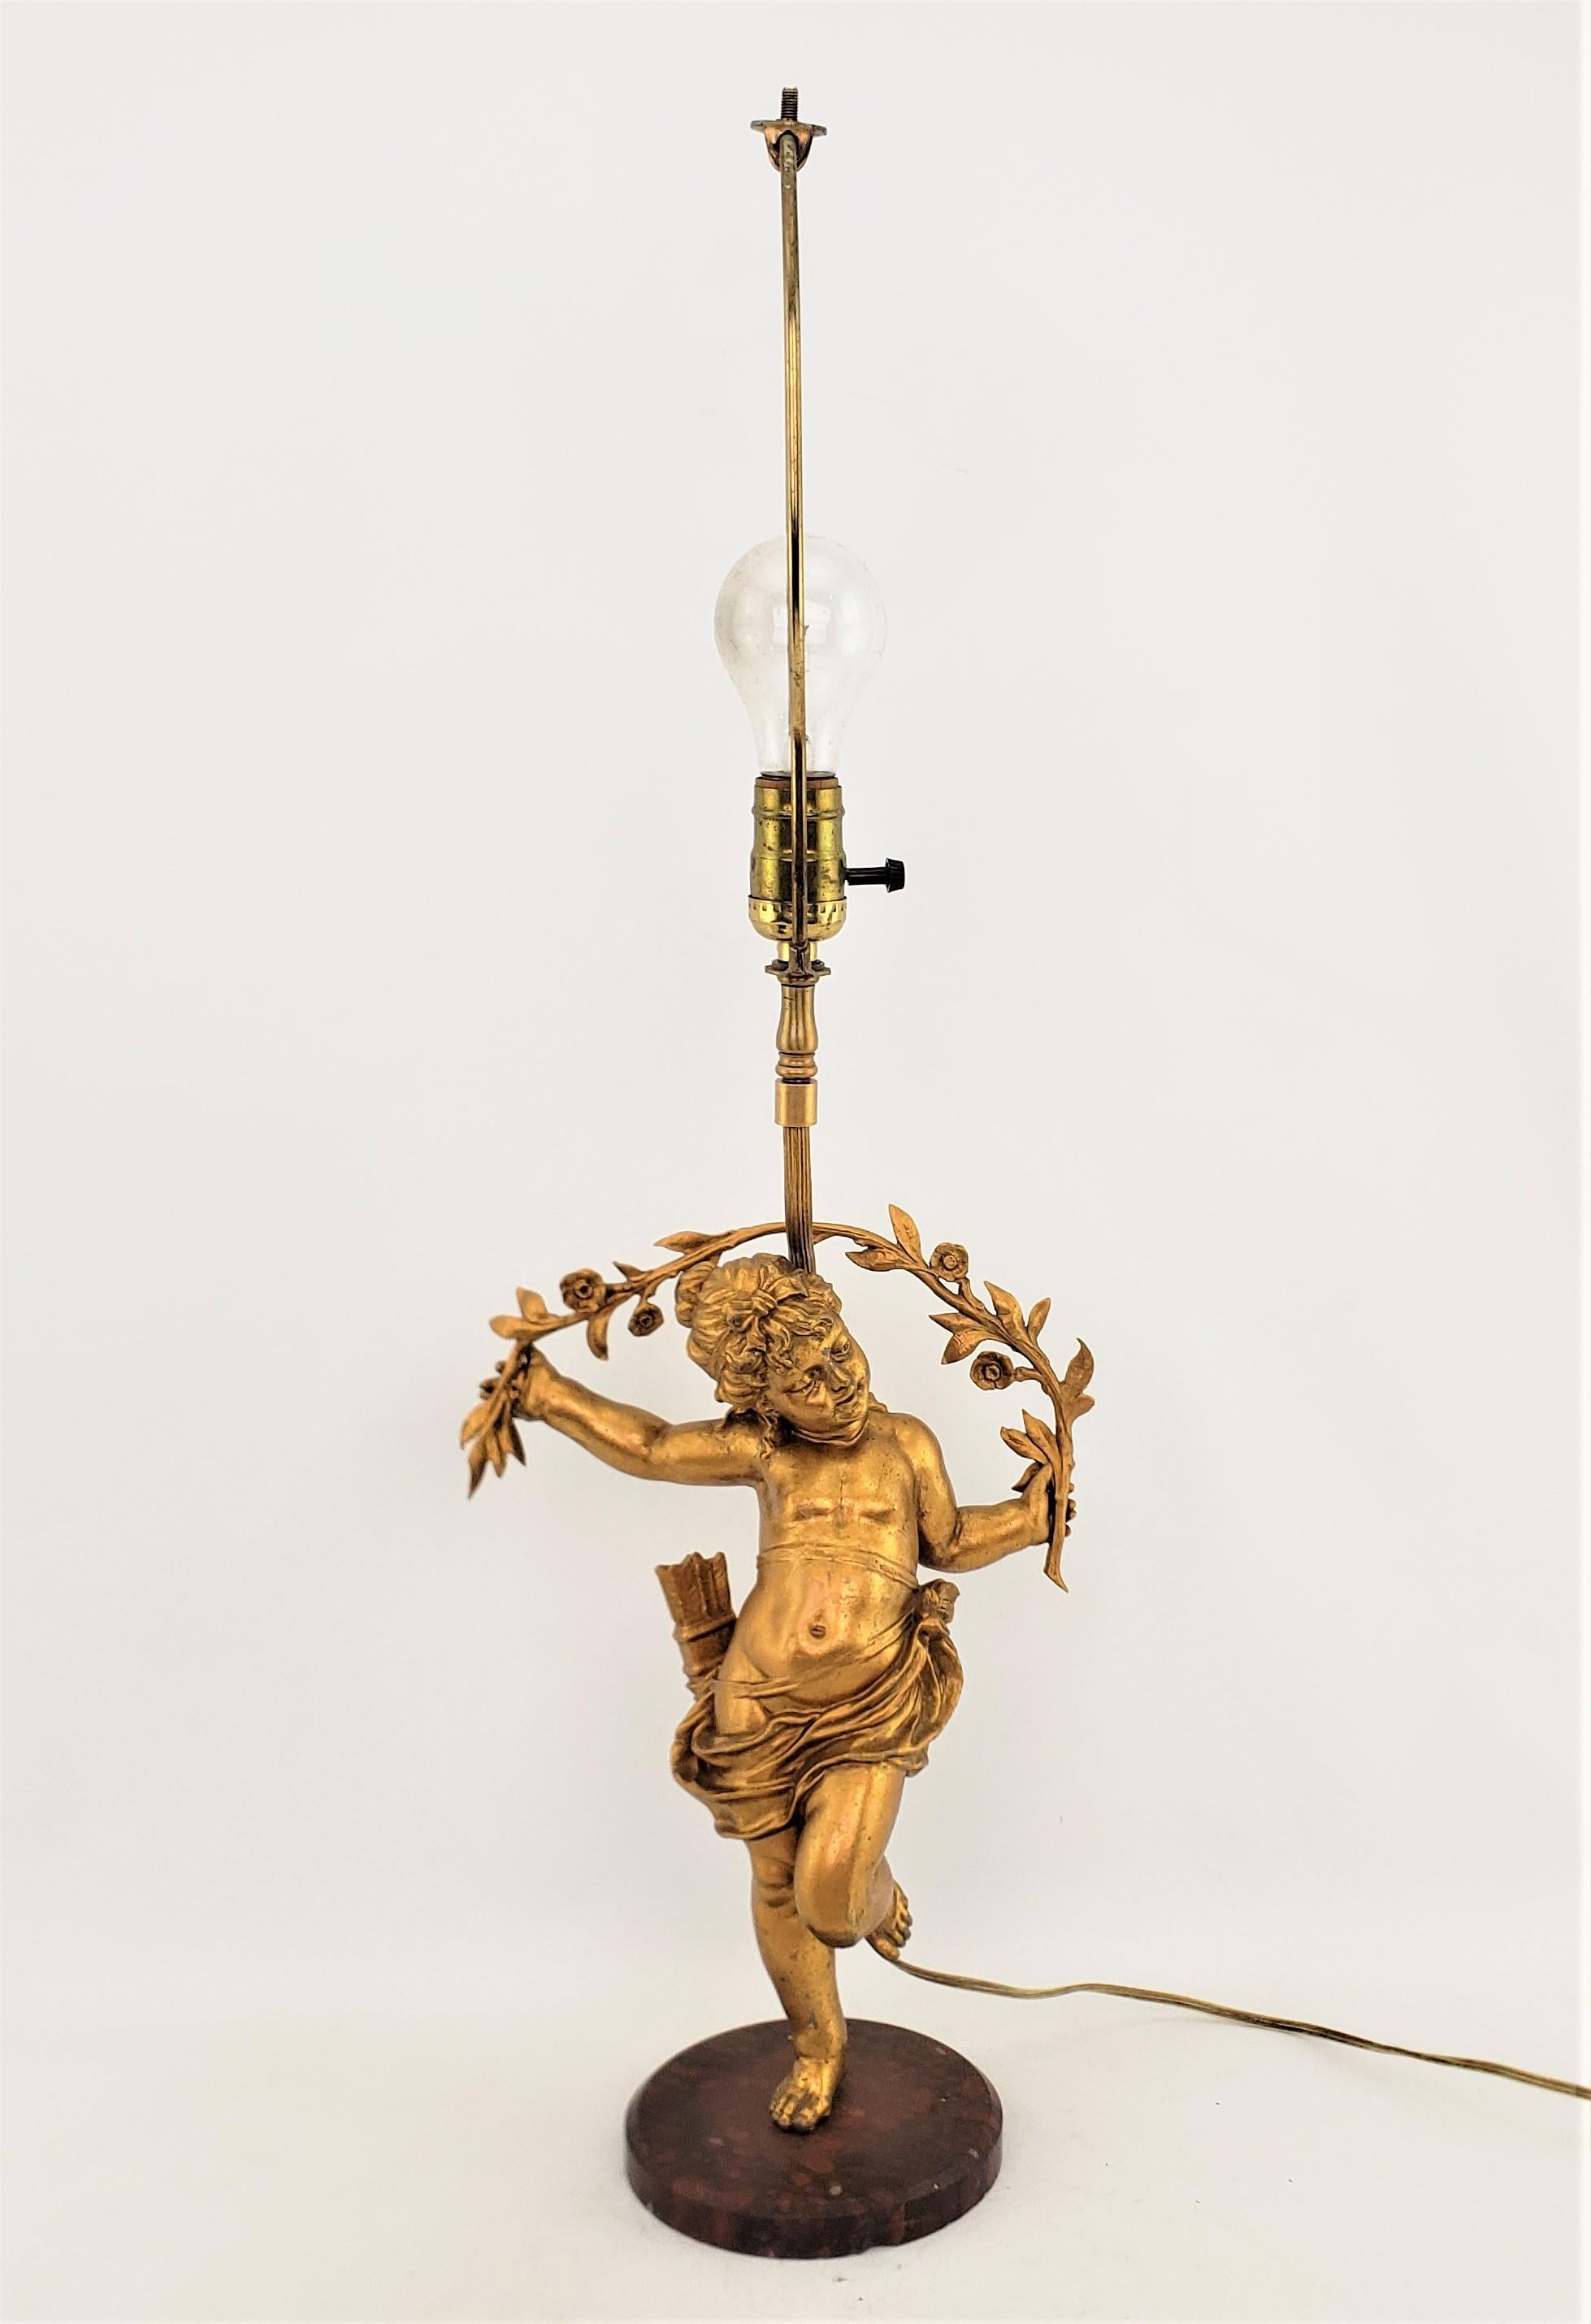 This antique table lamp is unsigned, but presumed to have originated from Italy and date to approximately 1920 and done in a Hollywood Regency style. The lamp features an ornately cast spelter cherub with a gilt finish and mounted to a red and black